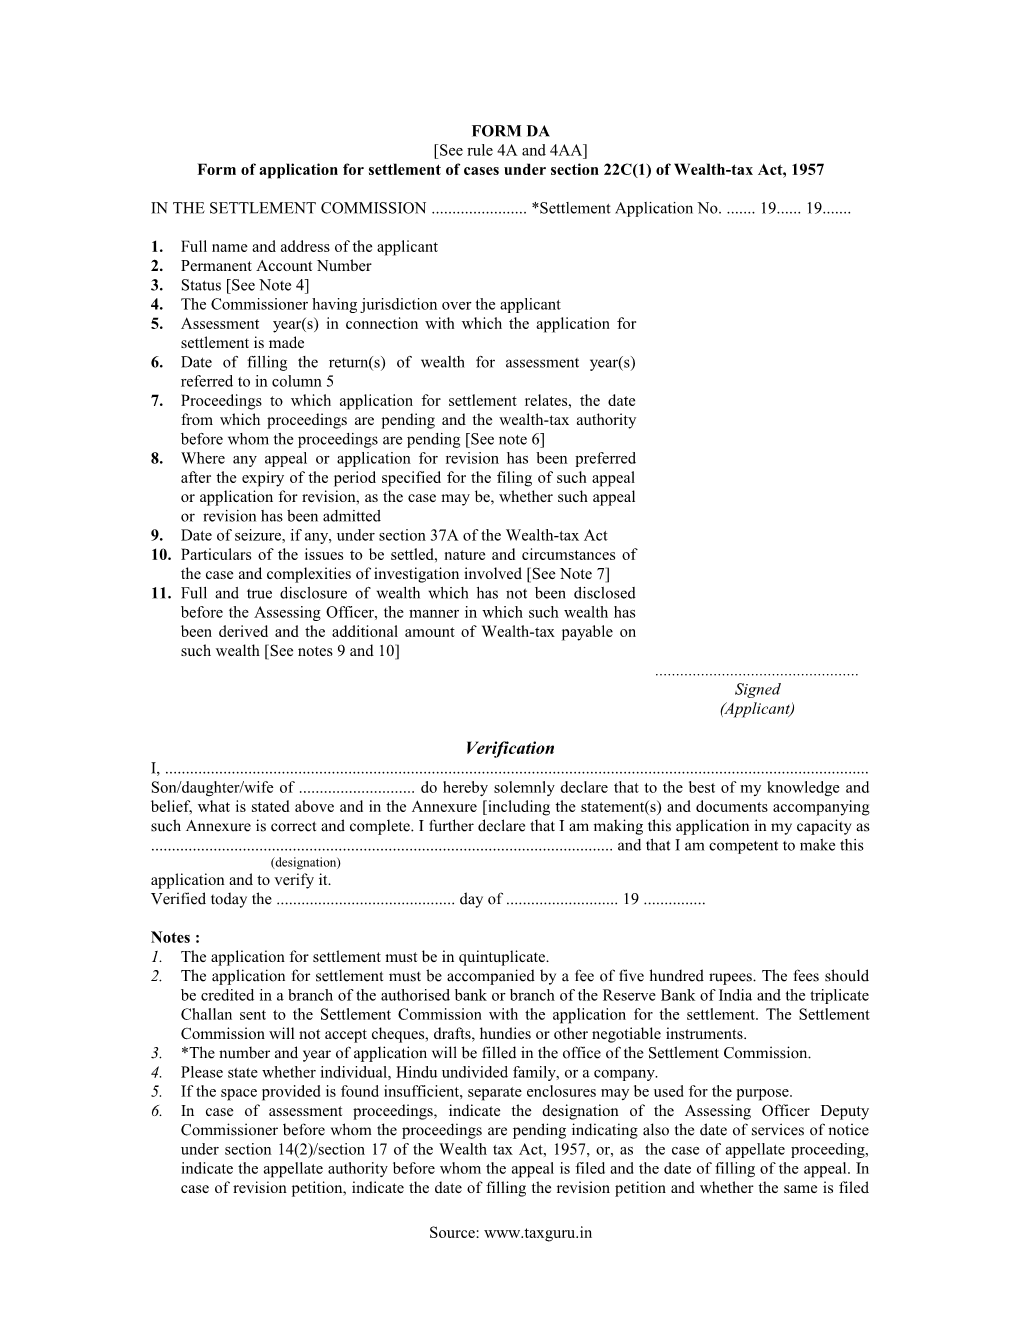 Form of Application for Settlement of Cases Under Section 22C(1) of Wealth-Tax Act, 1957